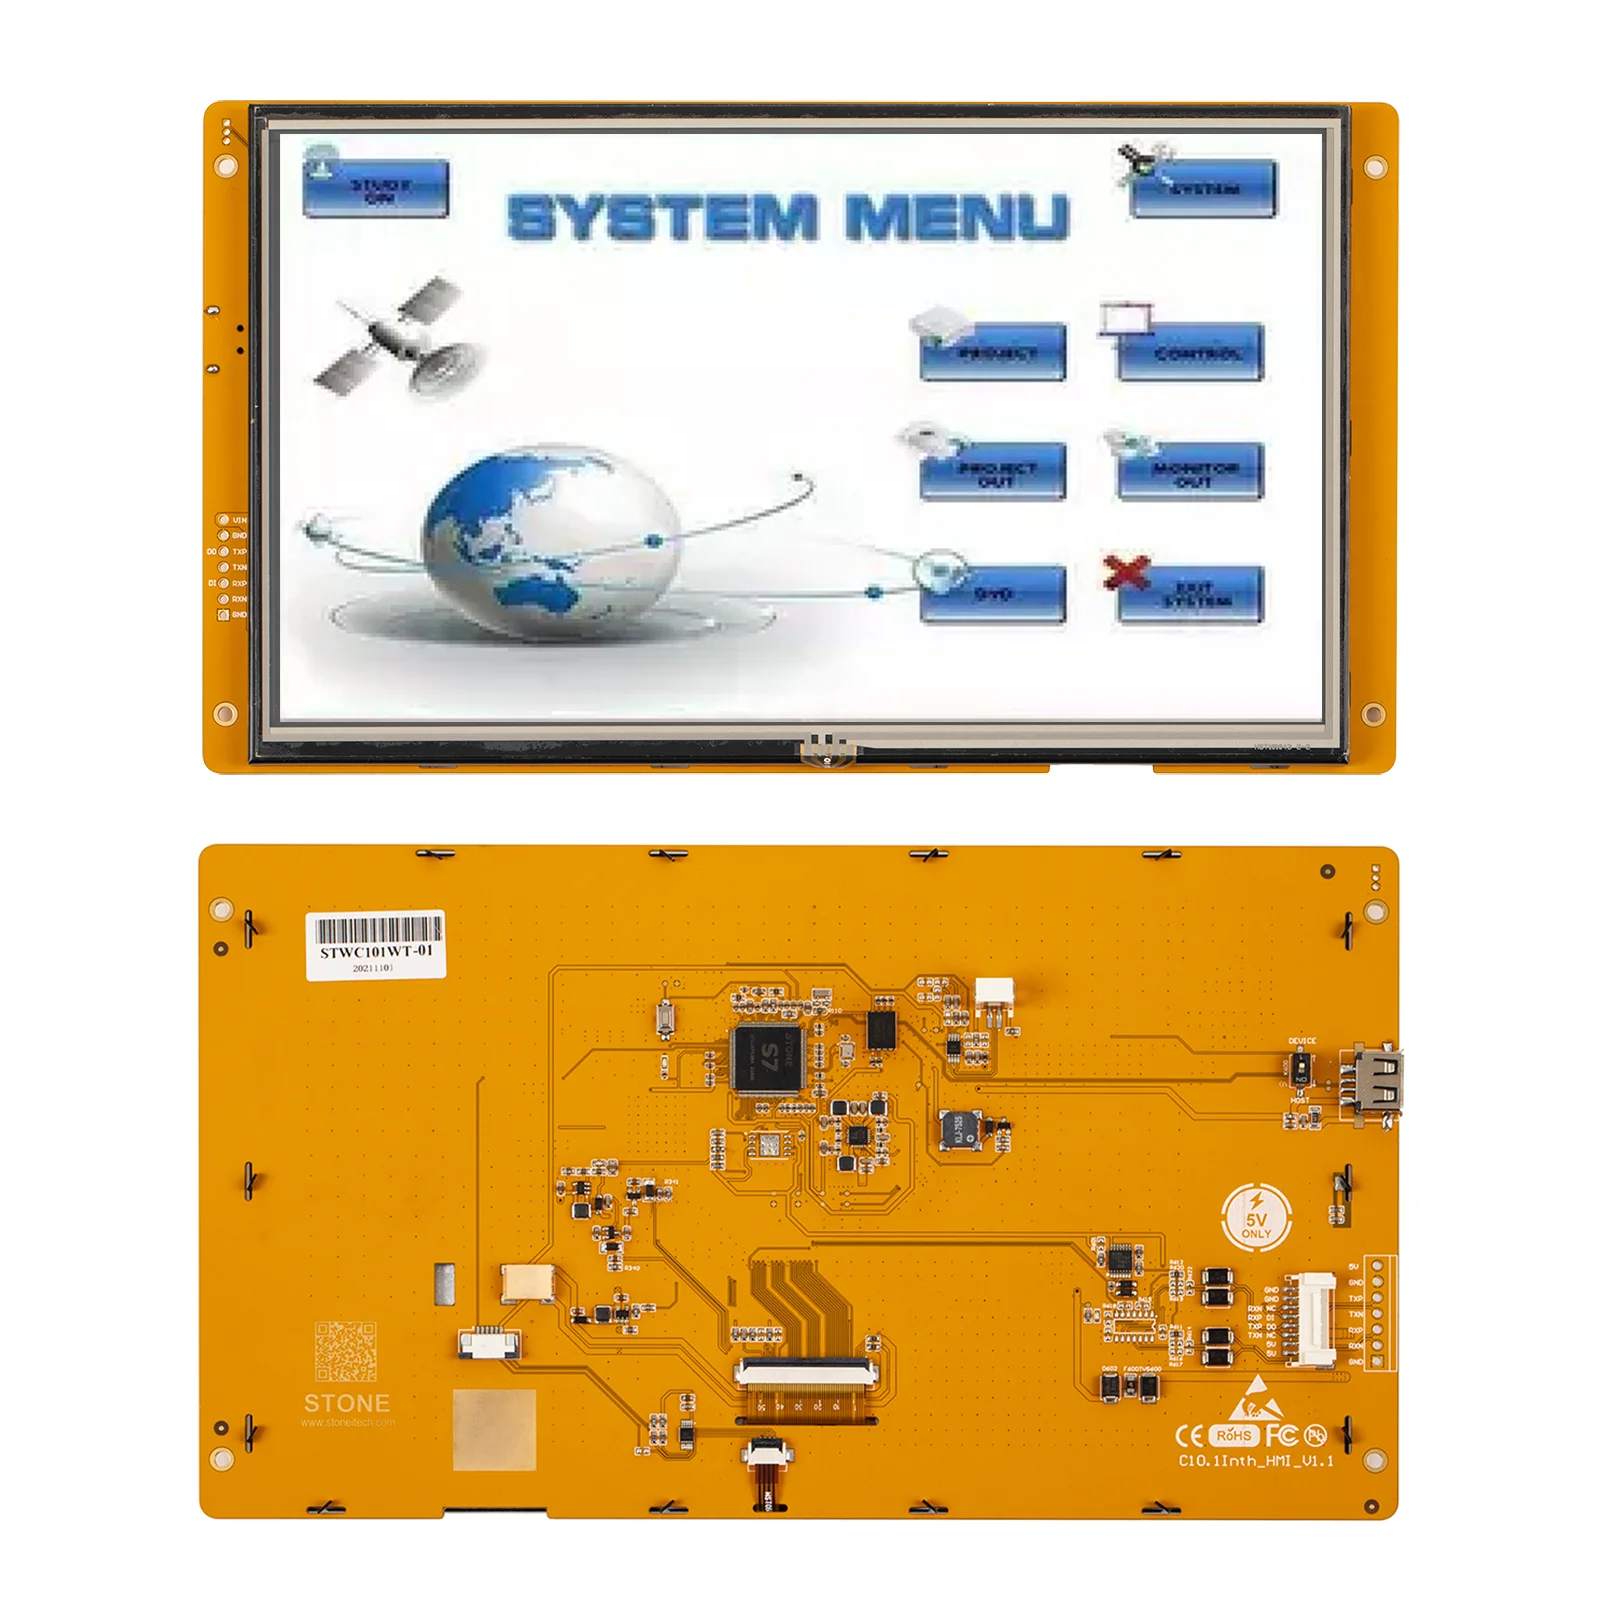 10.1 inch Smart LCD Touchscreen support for Engineering Machinery and Vehicle Equipment